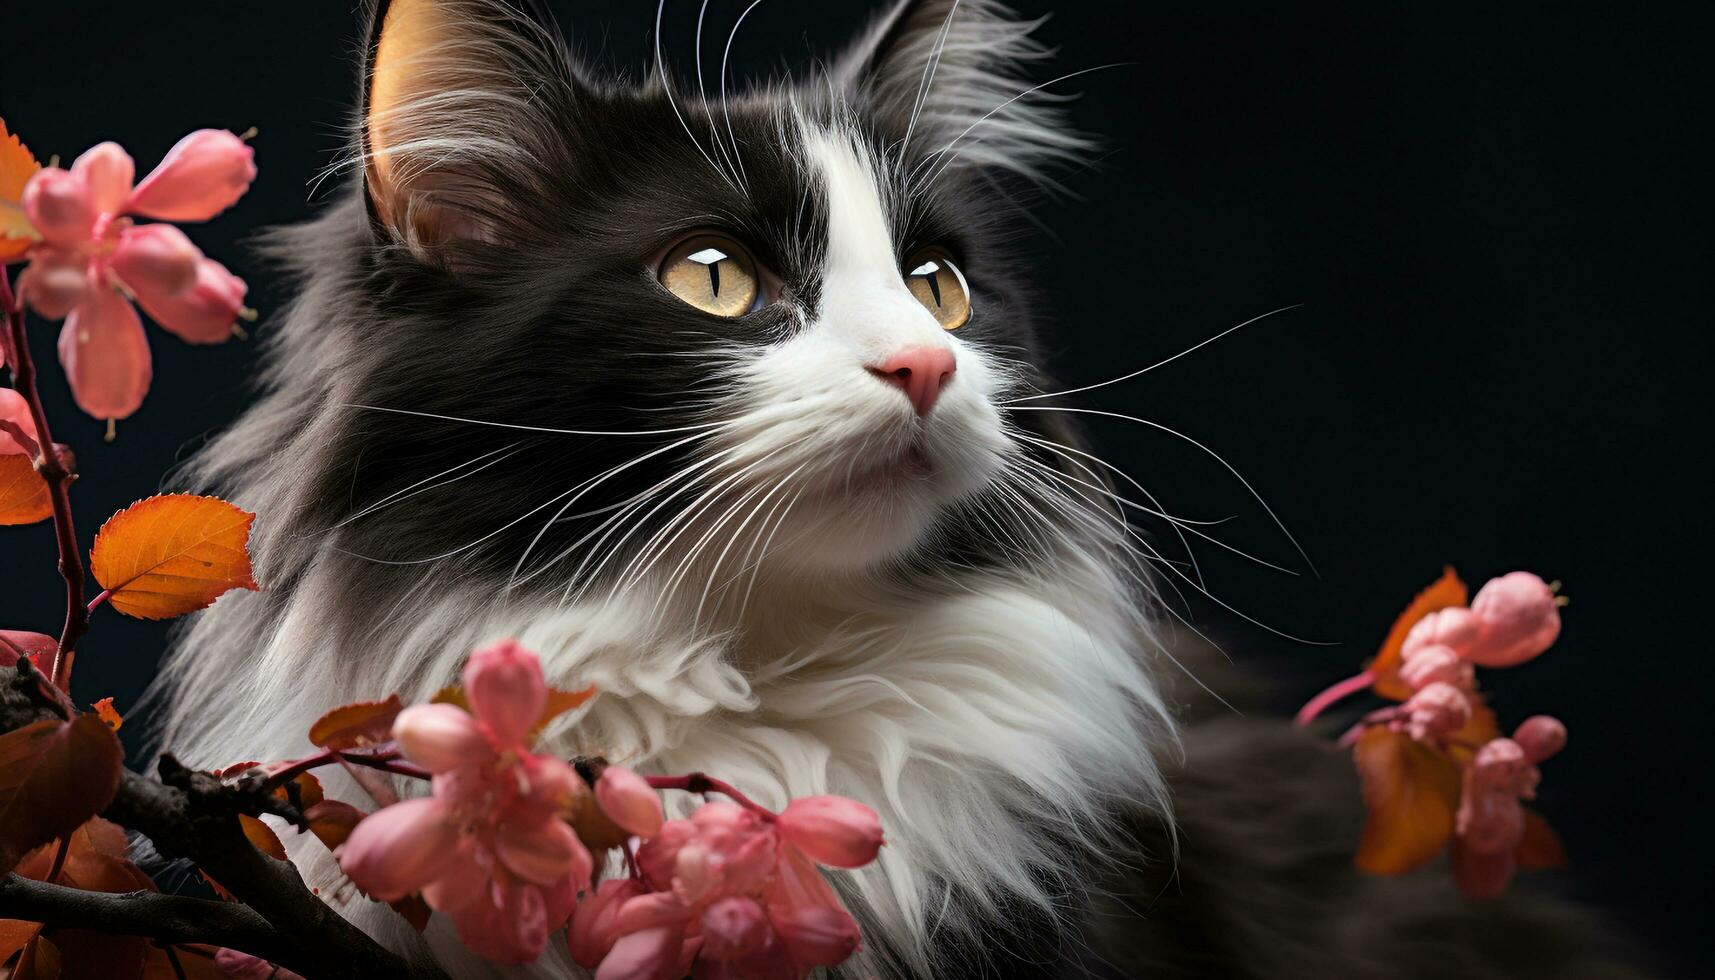 Cute domestic cat sitting, looking at camera, surrounded by flowers generated by AI photo